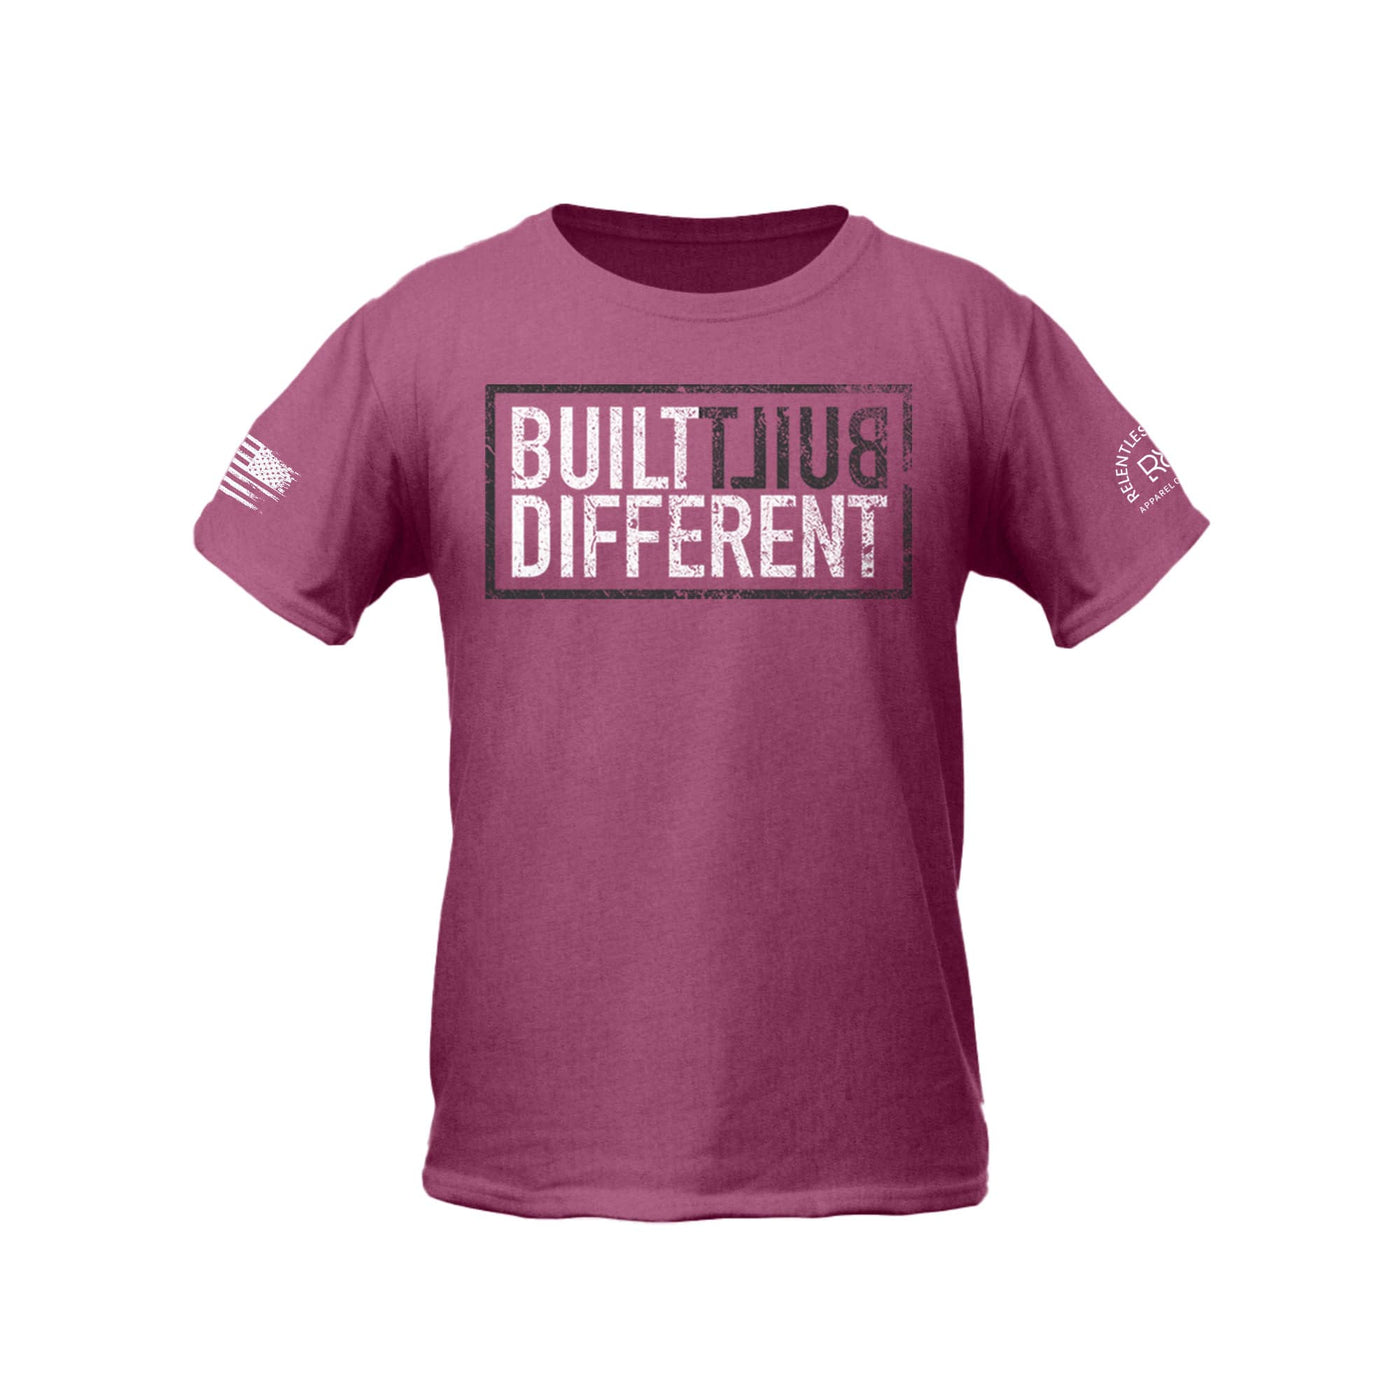 Built Different Youth front design heather magenta tee